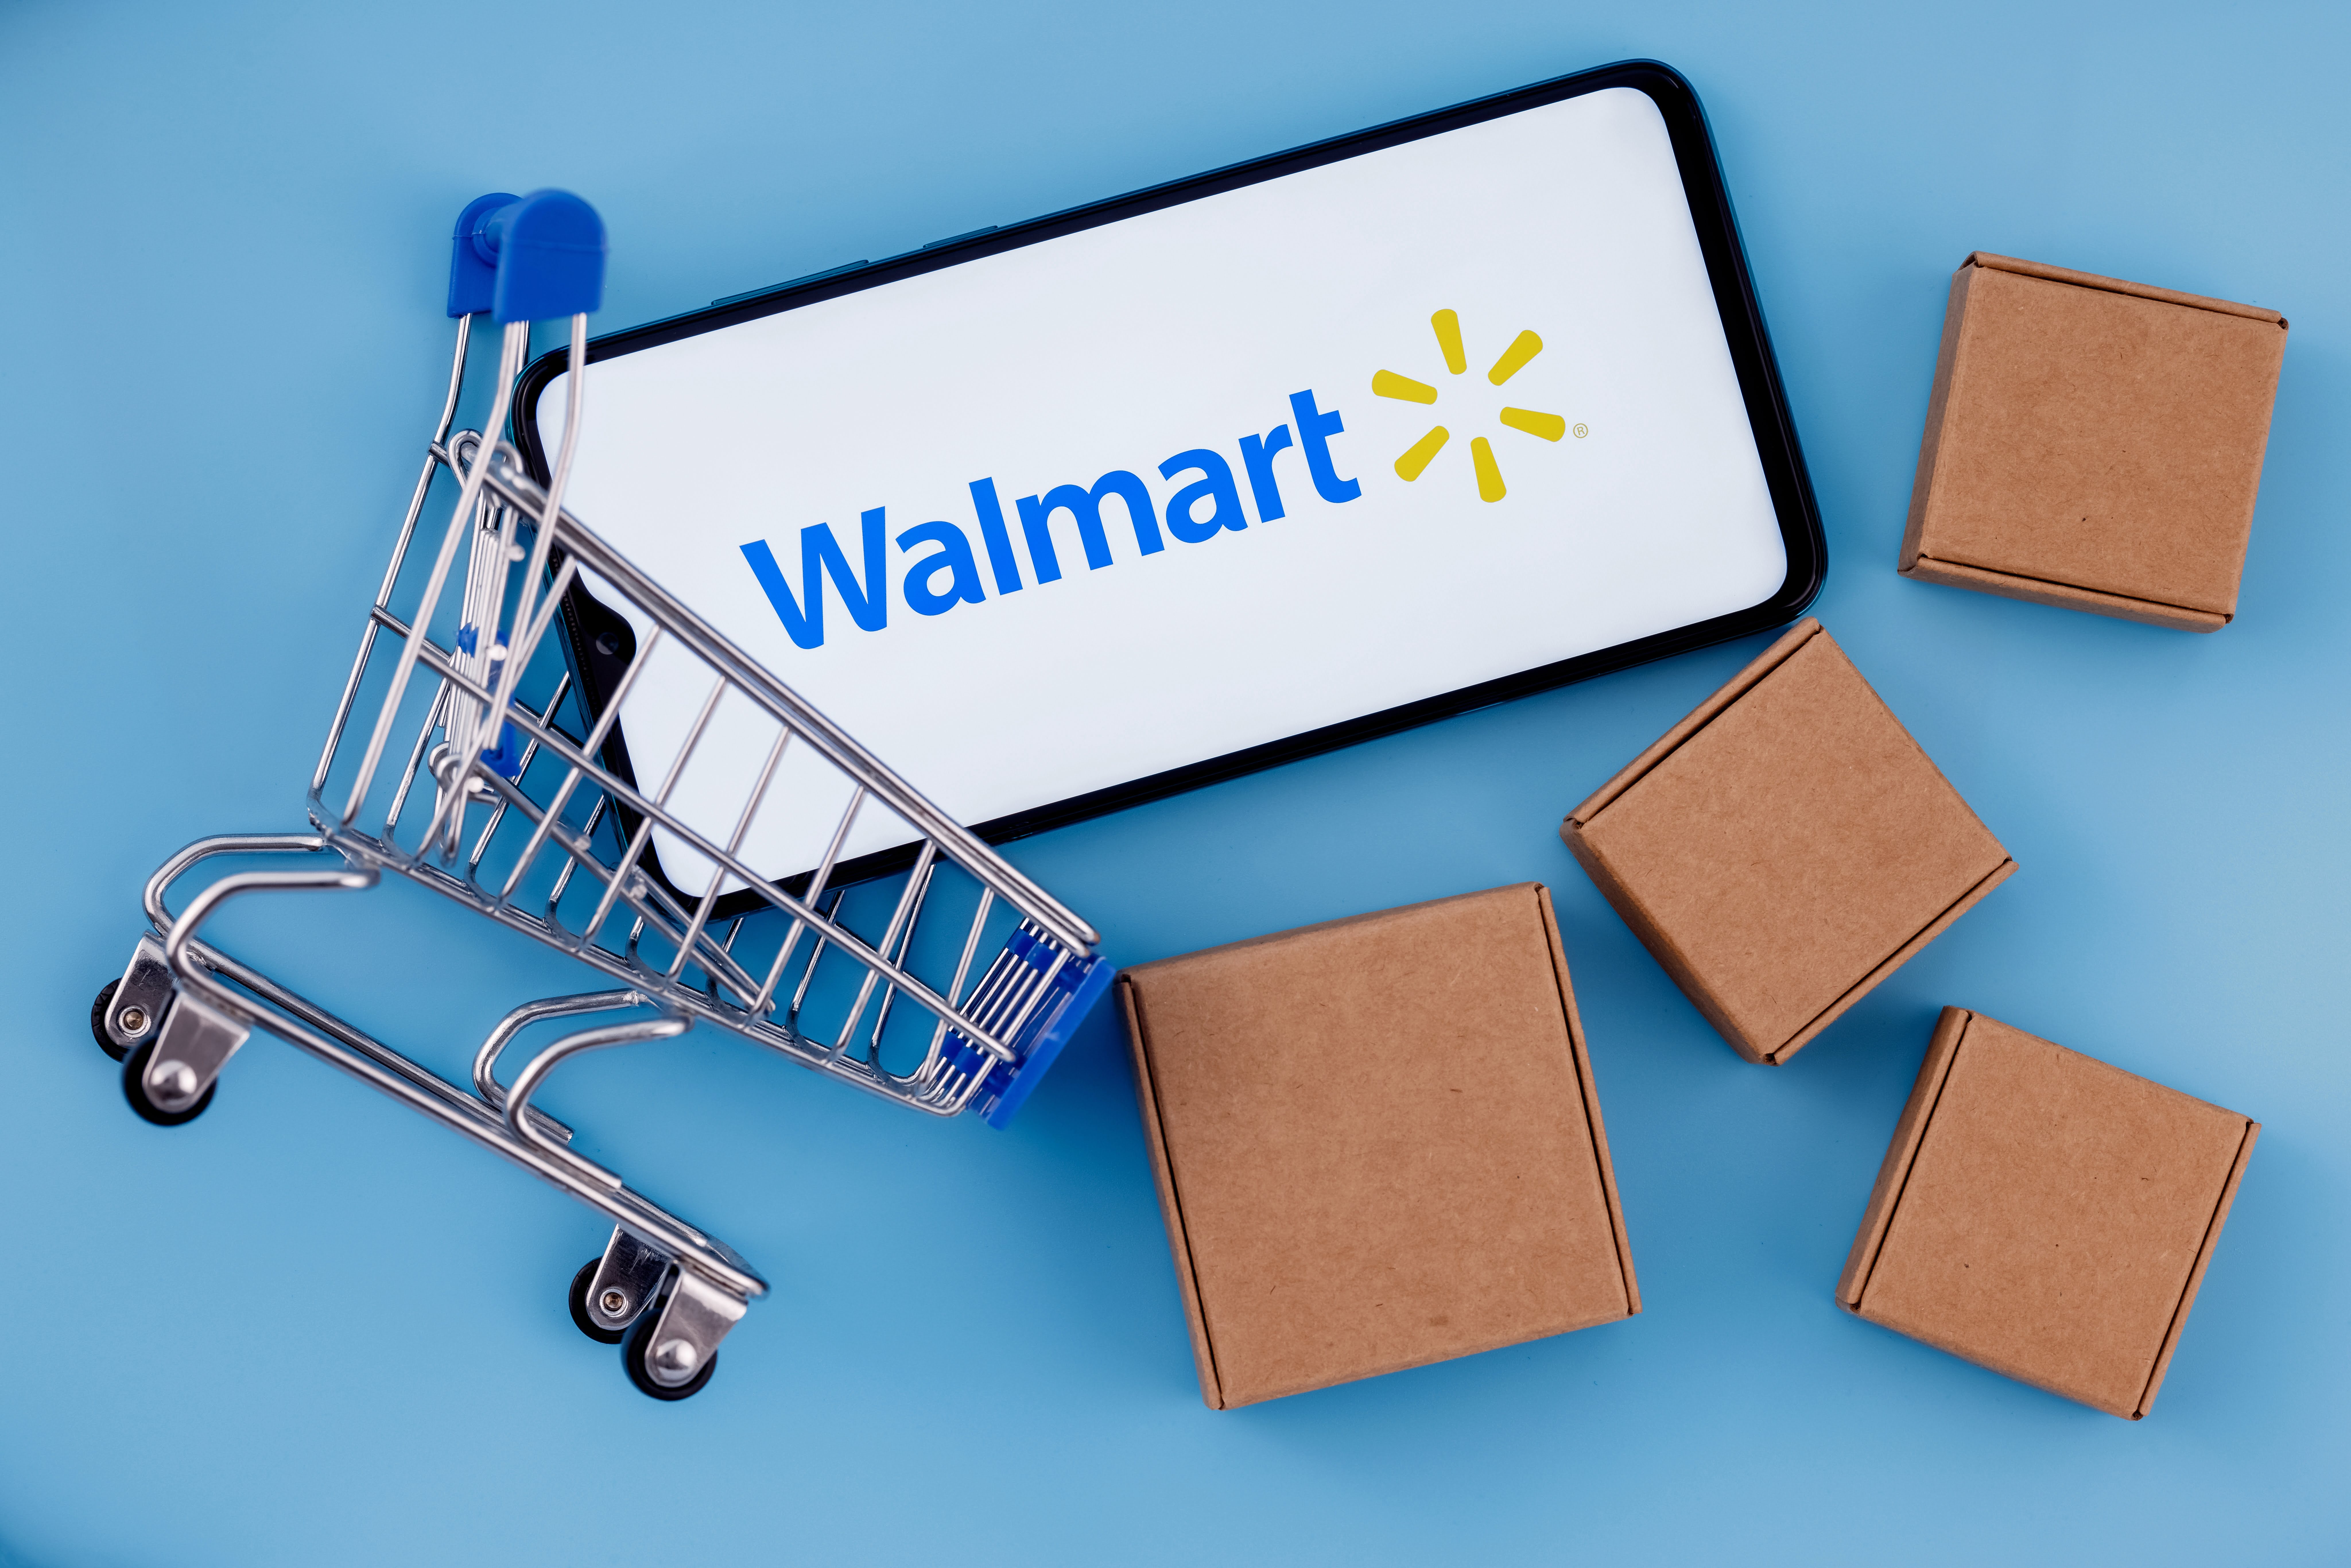 Walmart Will Offer Its Products With Live Broadcast